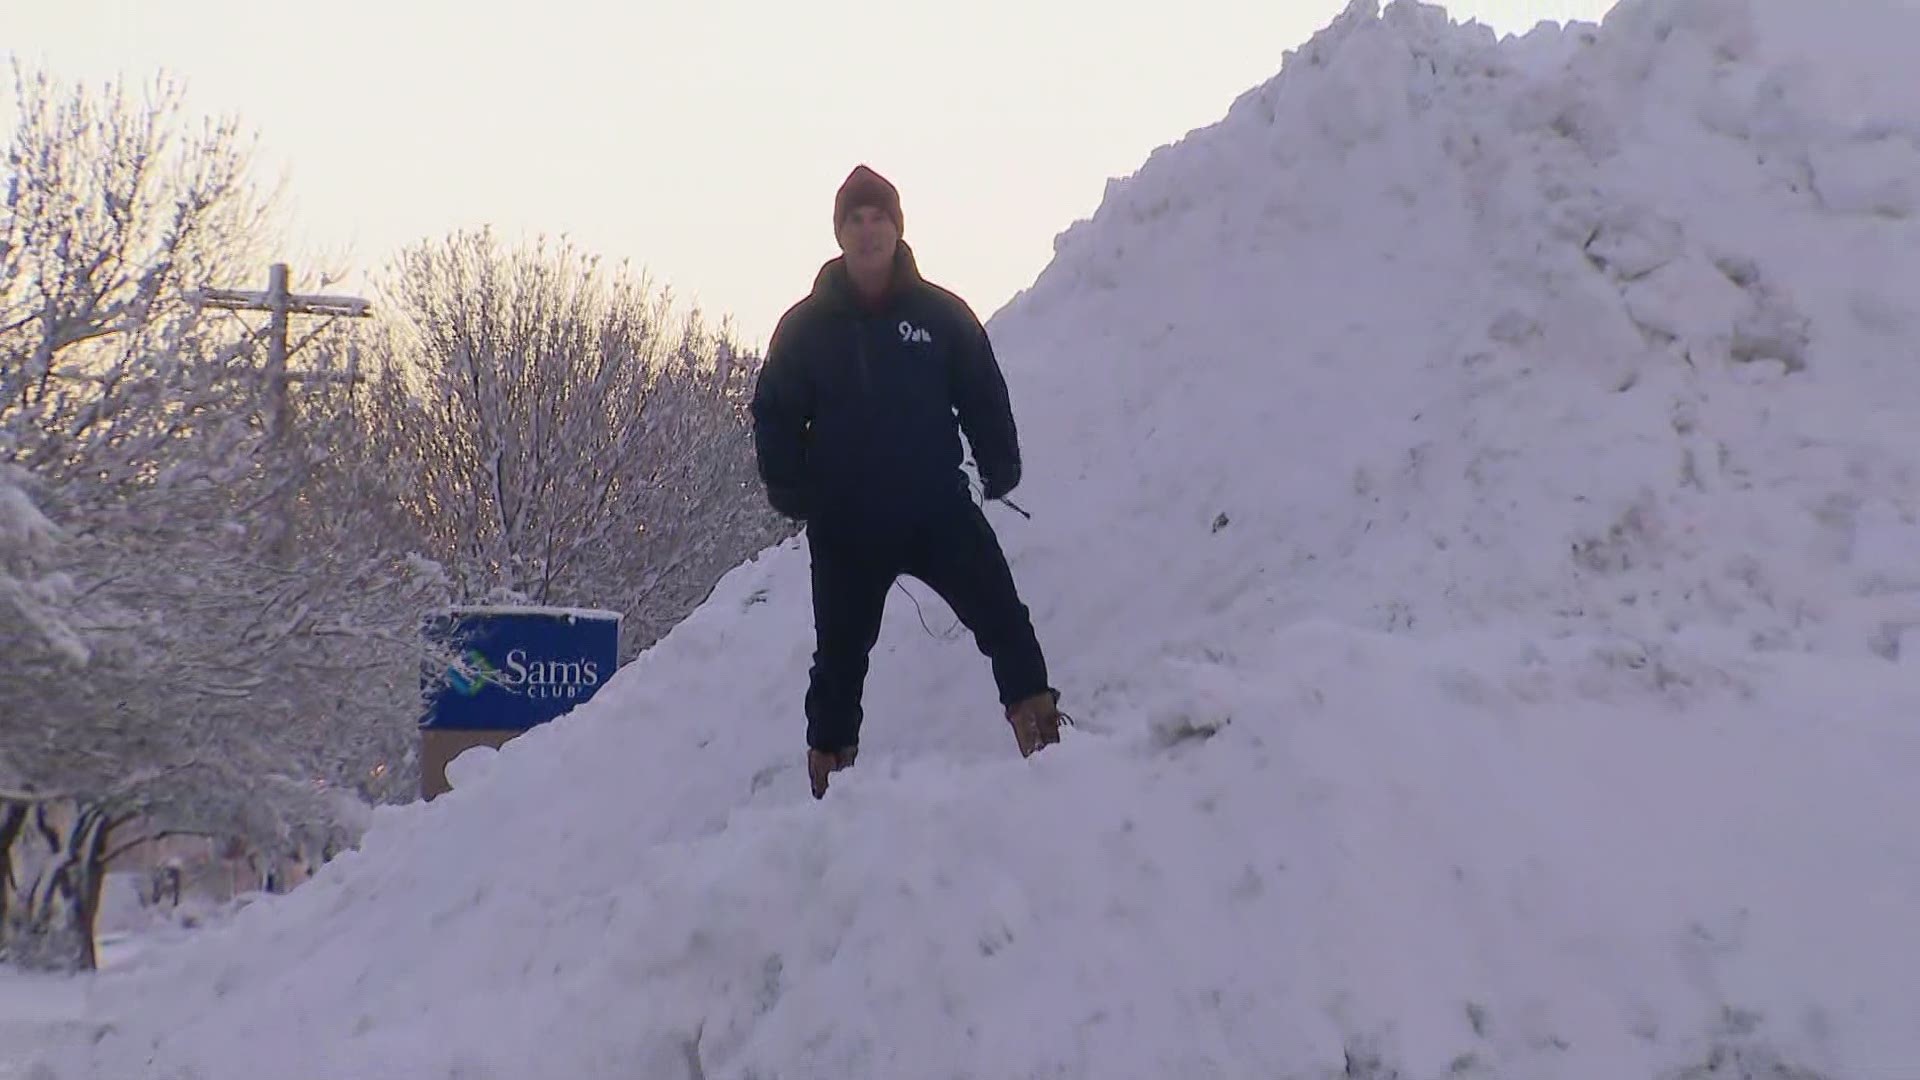 Jon Glasgow is in Loveland, where plows are piling up the snow after the weekend storm.